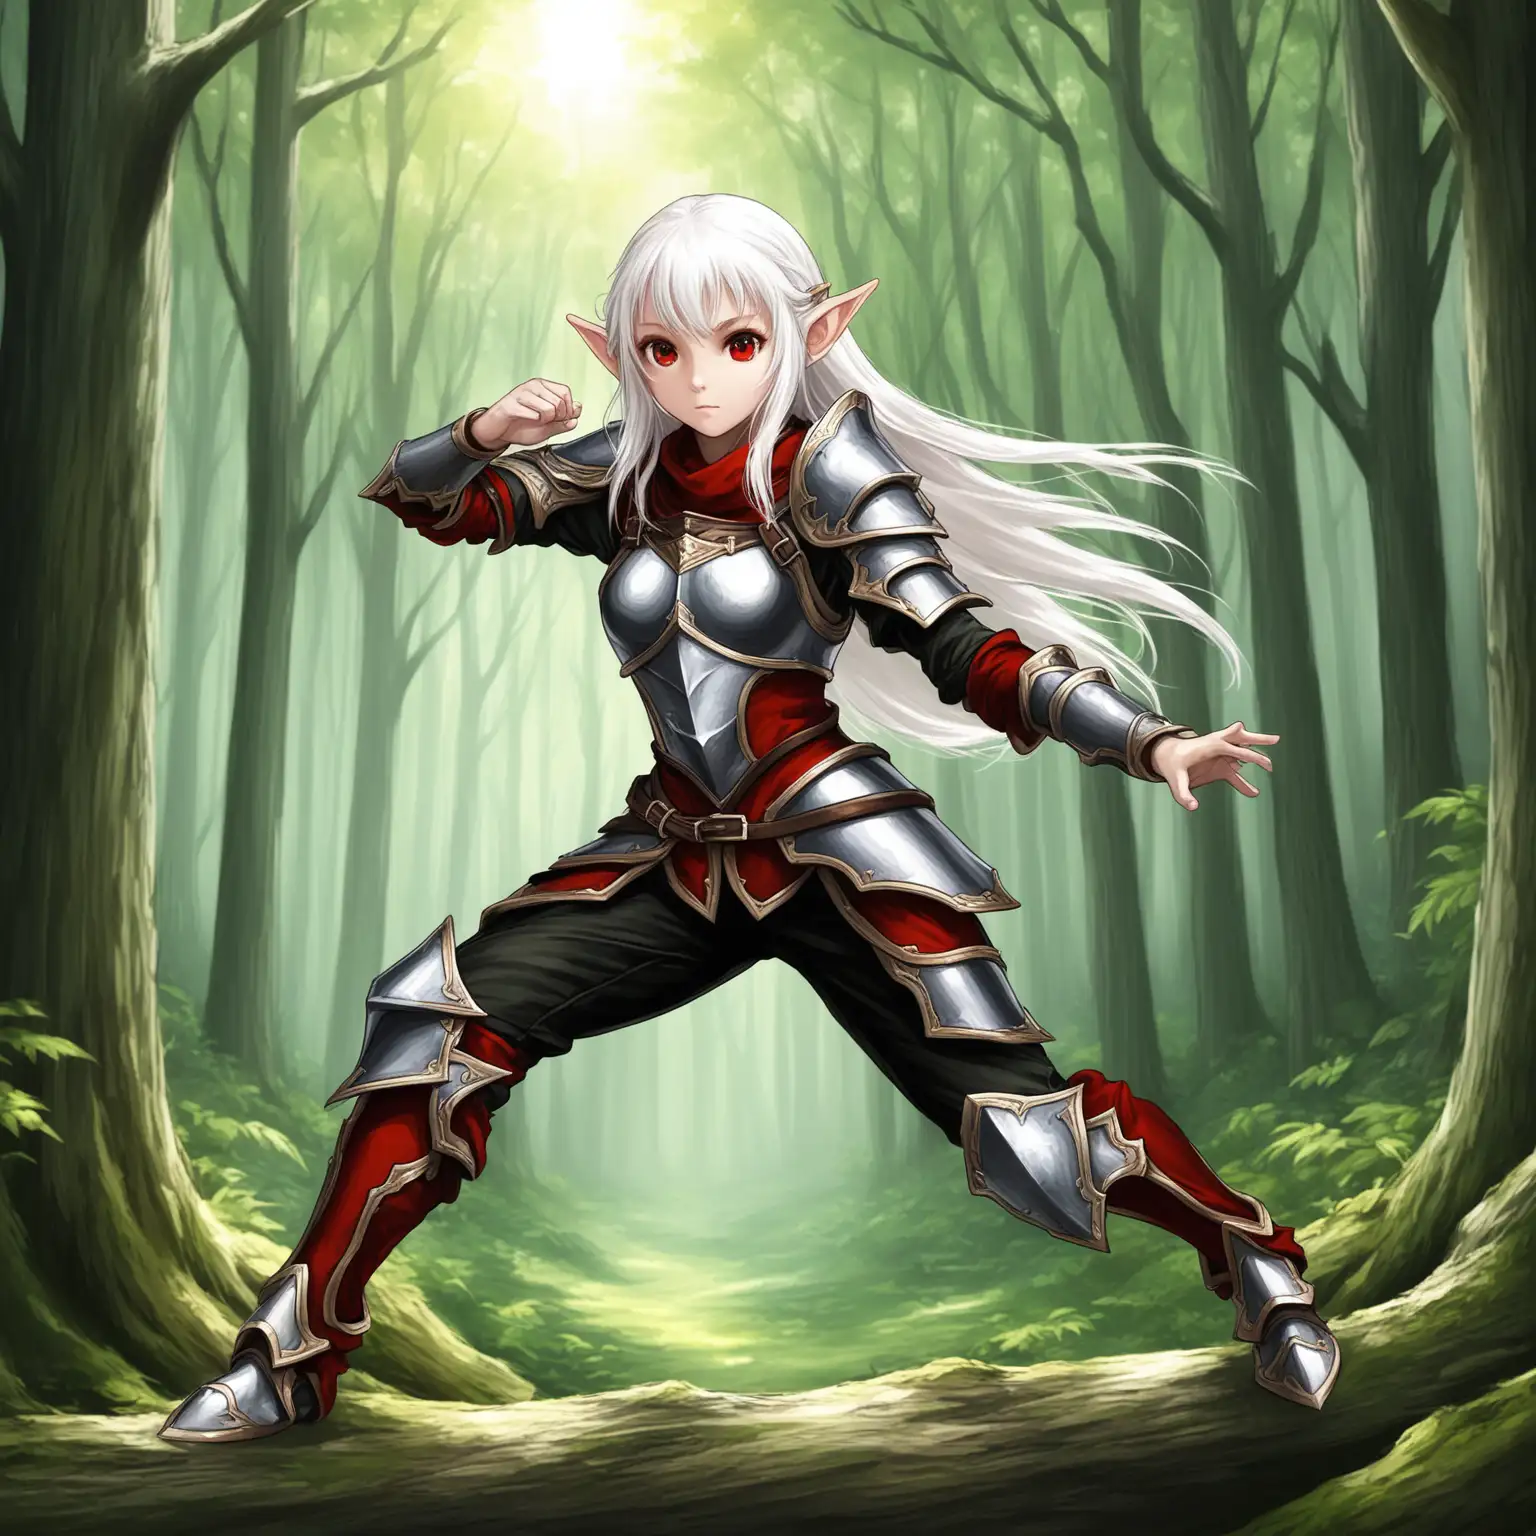 Adventurous Girl with Red Eyes in Forest Fantasy Scene